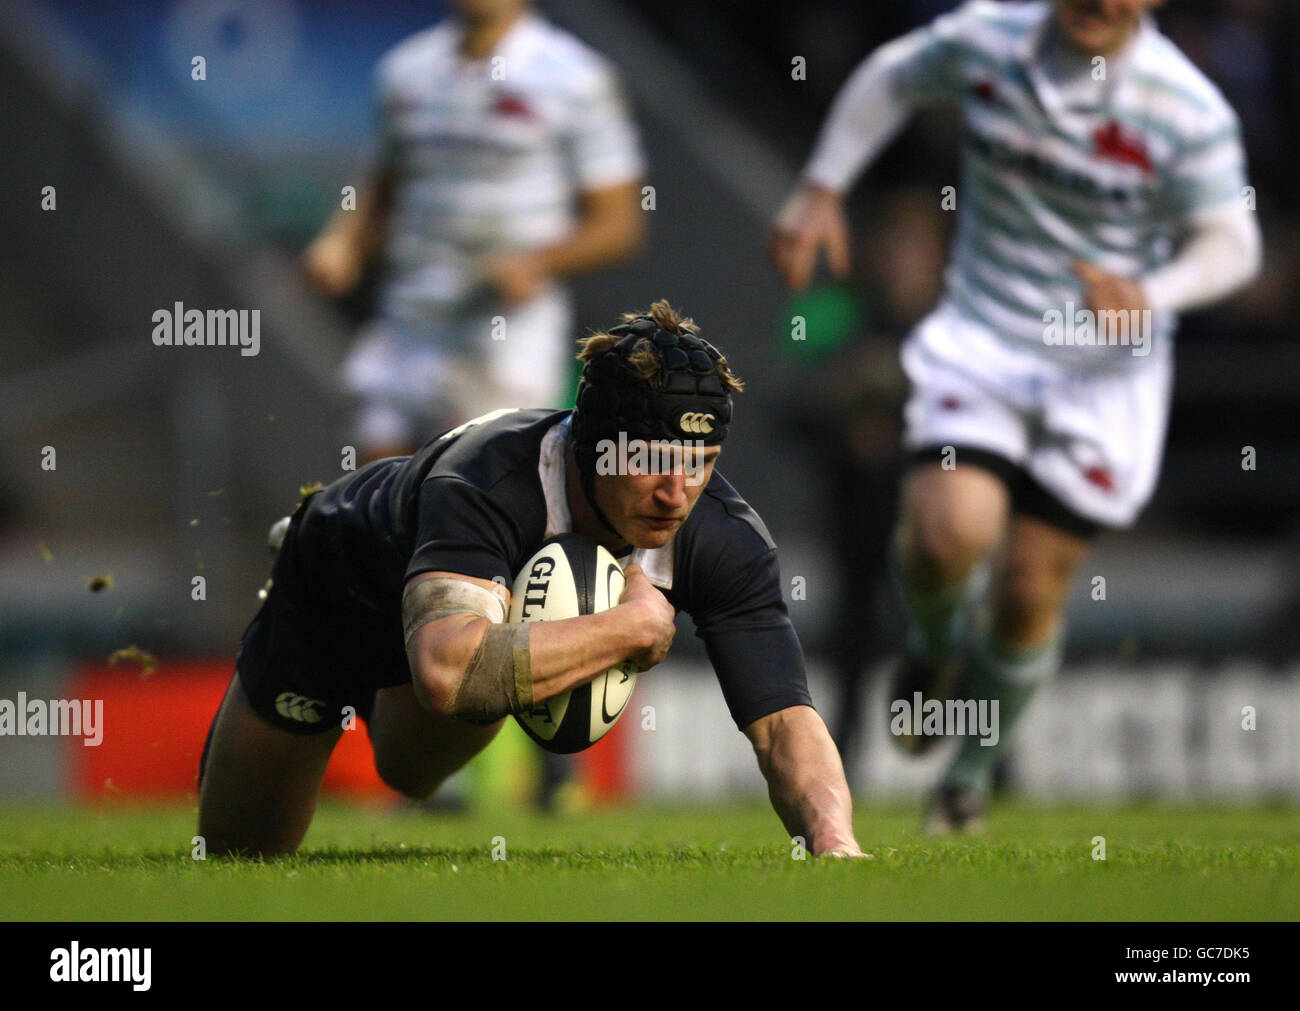 Oxford's Alex Cheeseman scores his sides final try during the Nomura Varsity Match at Twickenham, London. Stock Photo